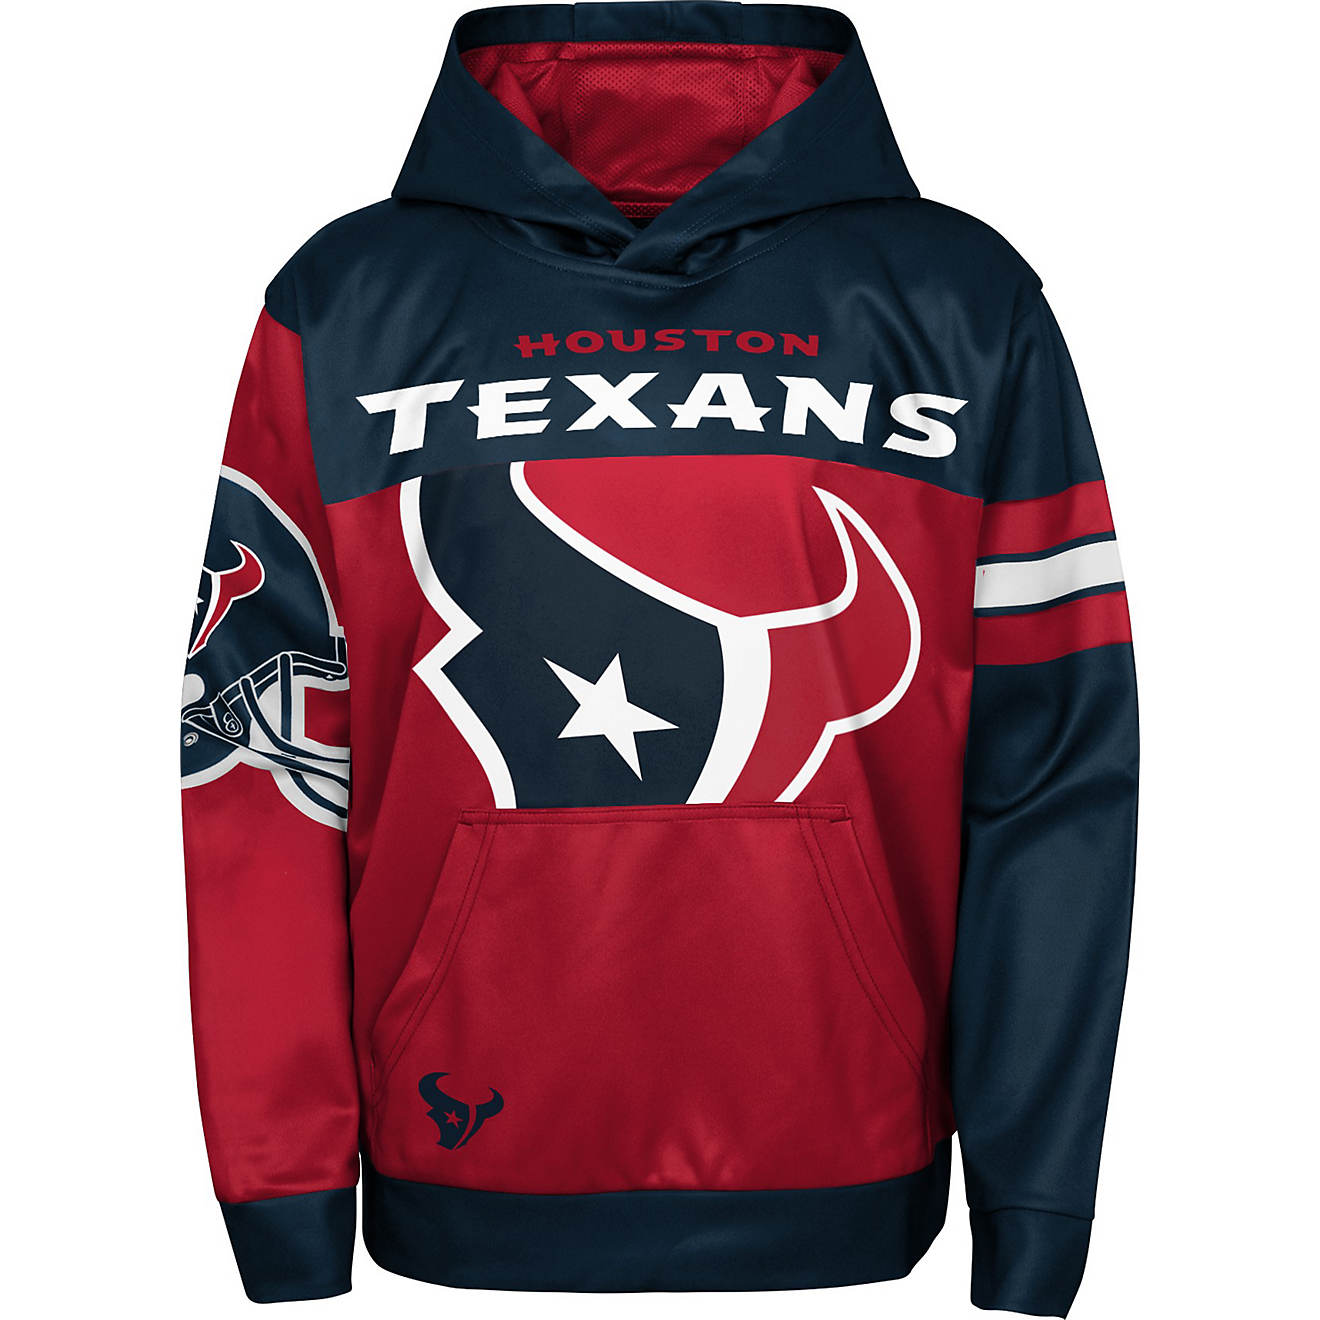 Outerstuff Youth Houston Texans First and Goal Sublimated Fleece Hoodie                                                          - view number 1